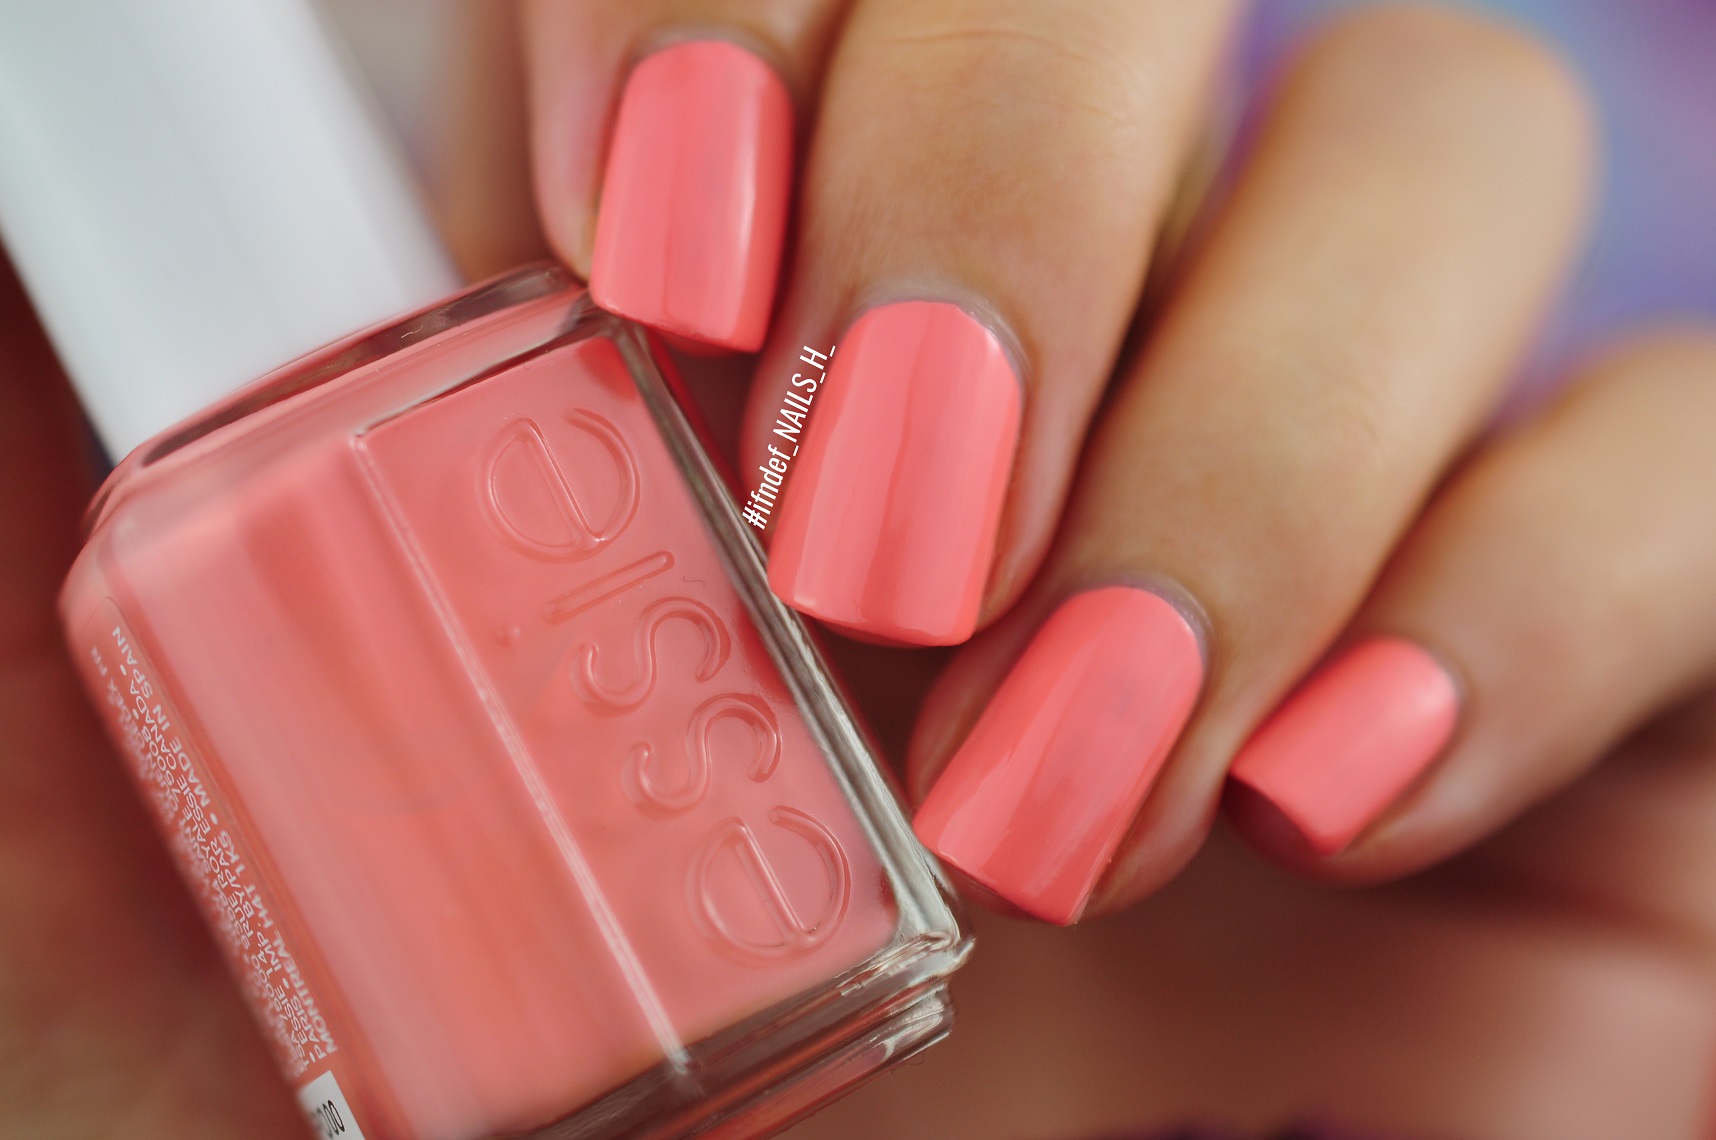 Essie Treat Love & Color Glowing Strong Swatch